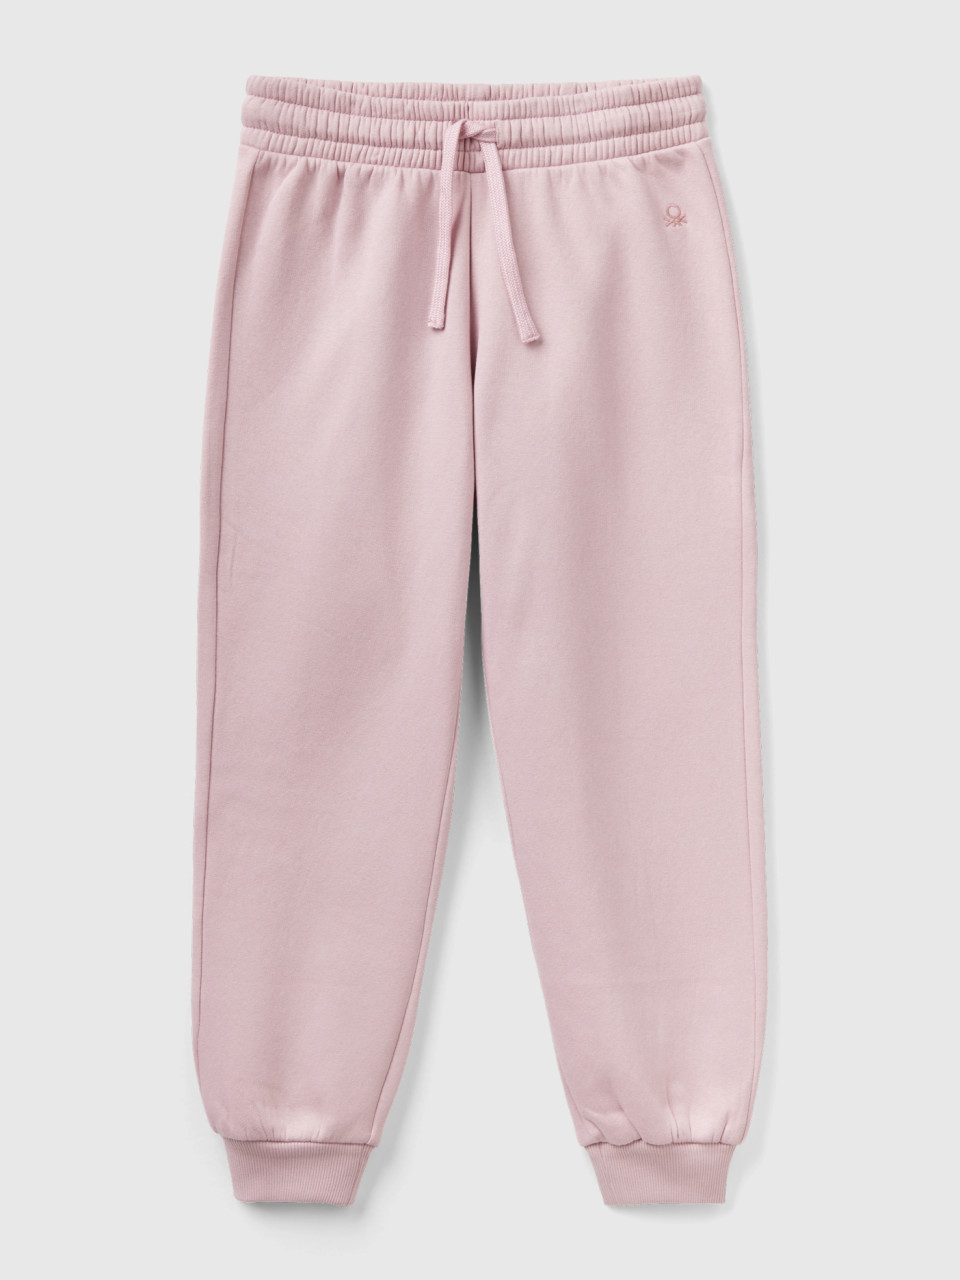 Benetton, Sweat Joggers With Drawstring, Pink, Kids